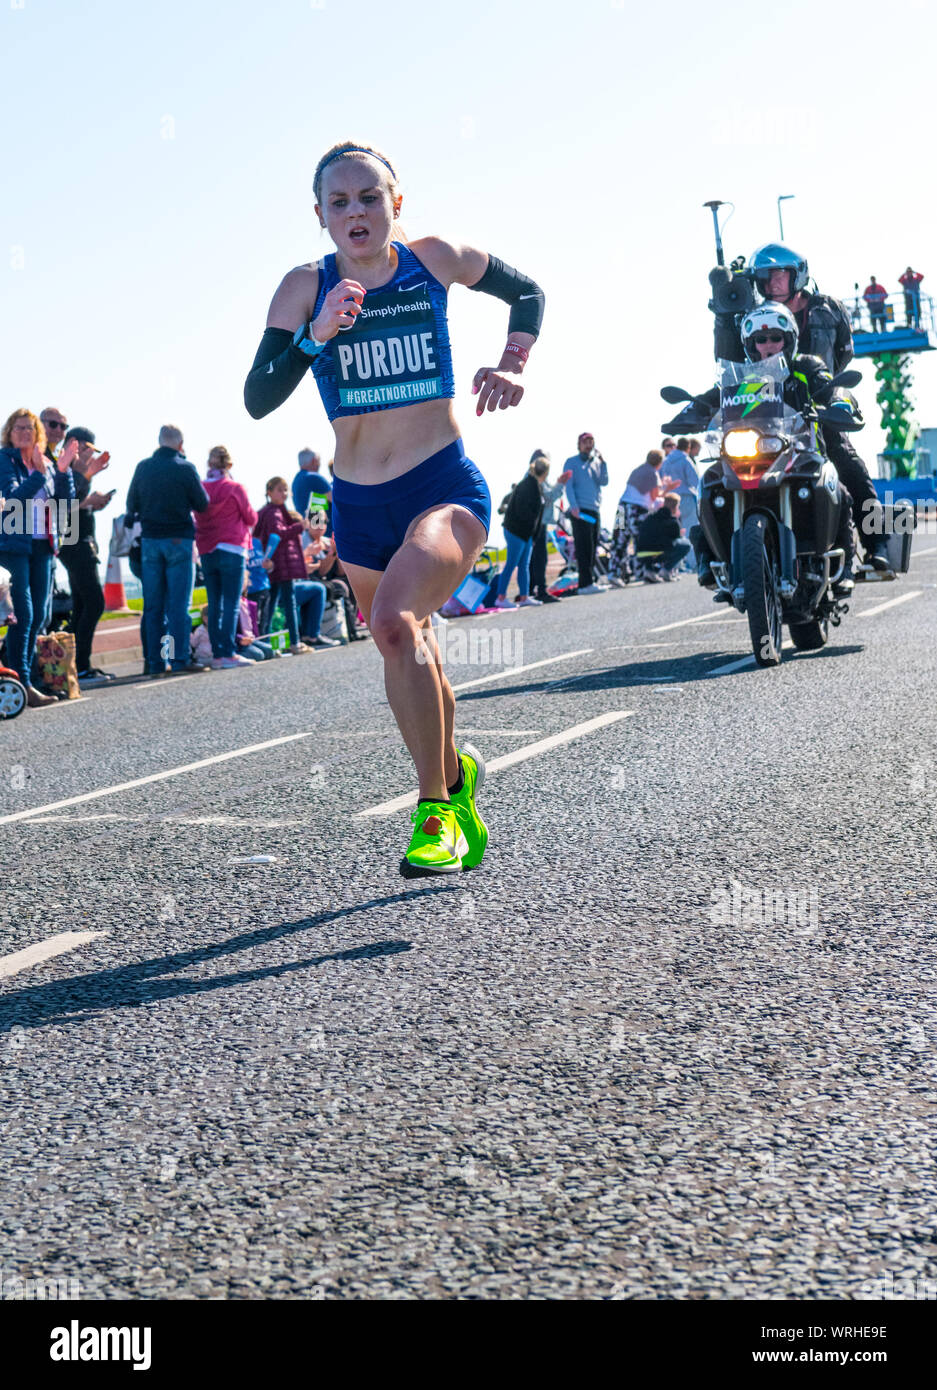 Womens elite runner Charlotte Purdue competing in the 2019 Great North Run from Newcastle to South Shields, England, UK Stock Photo